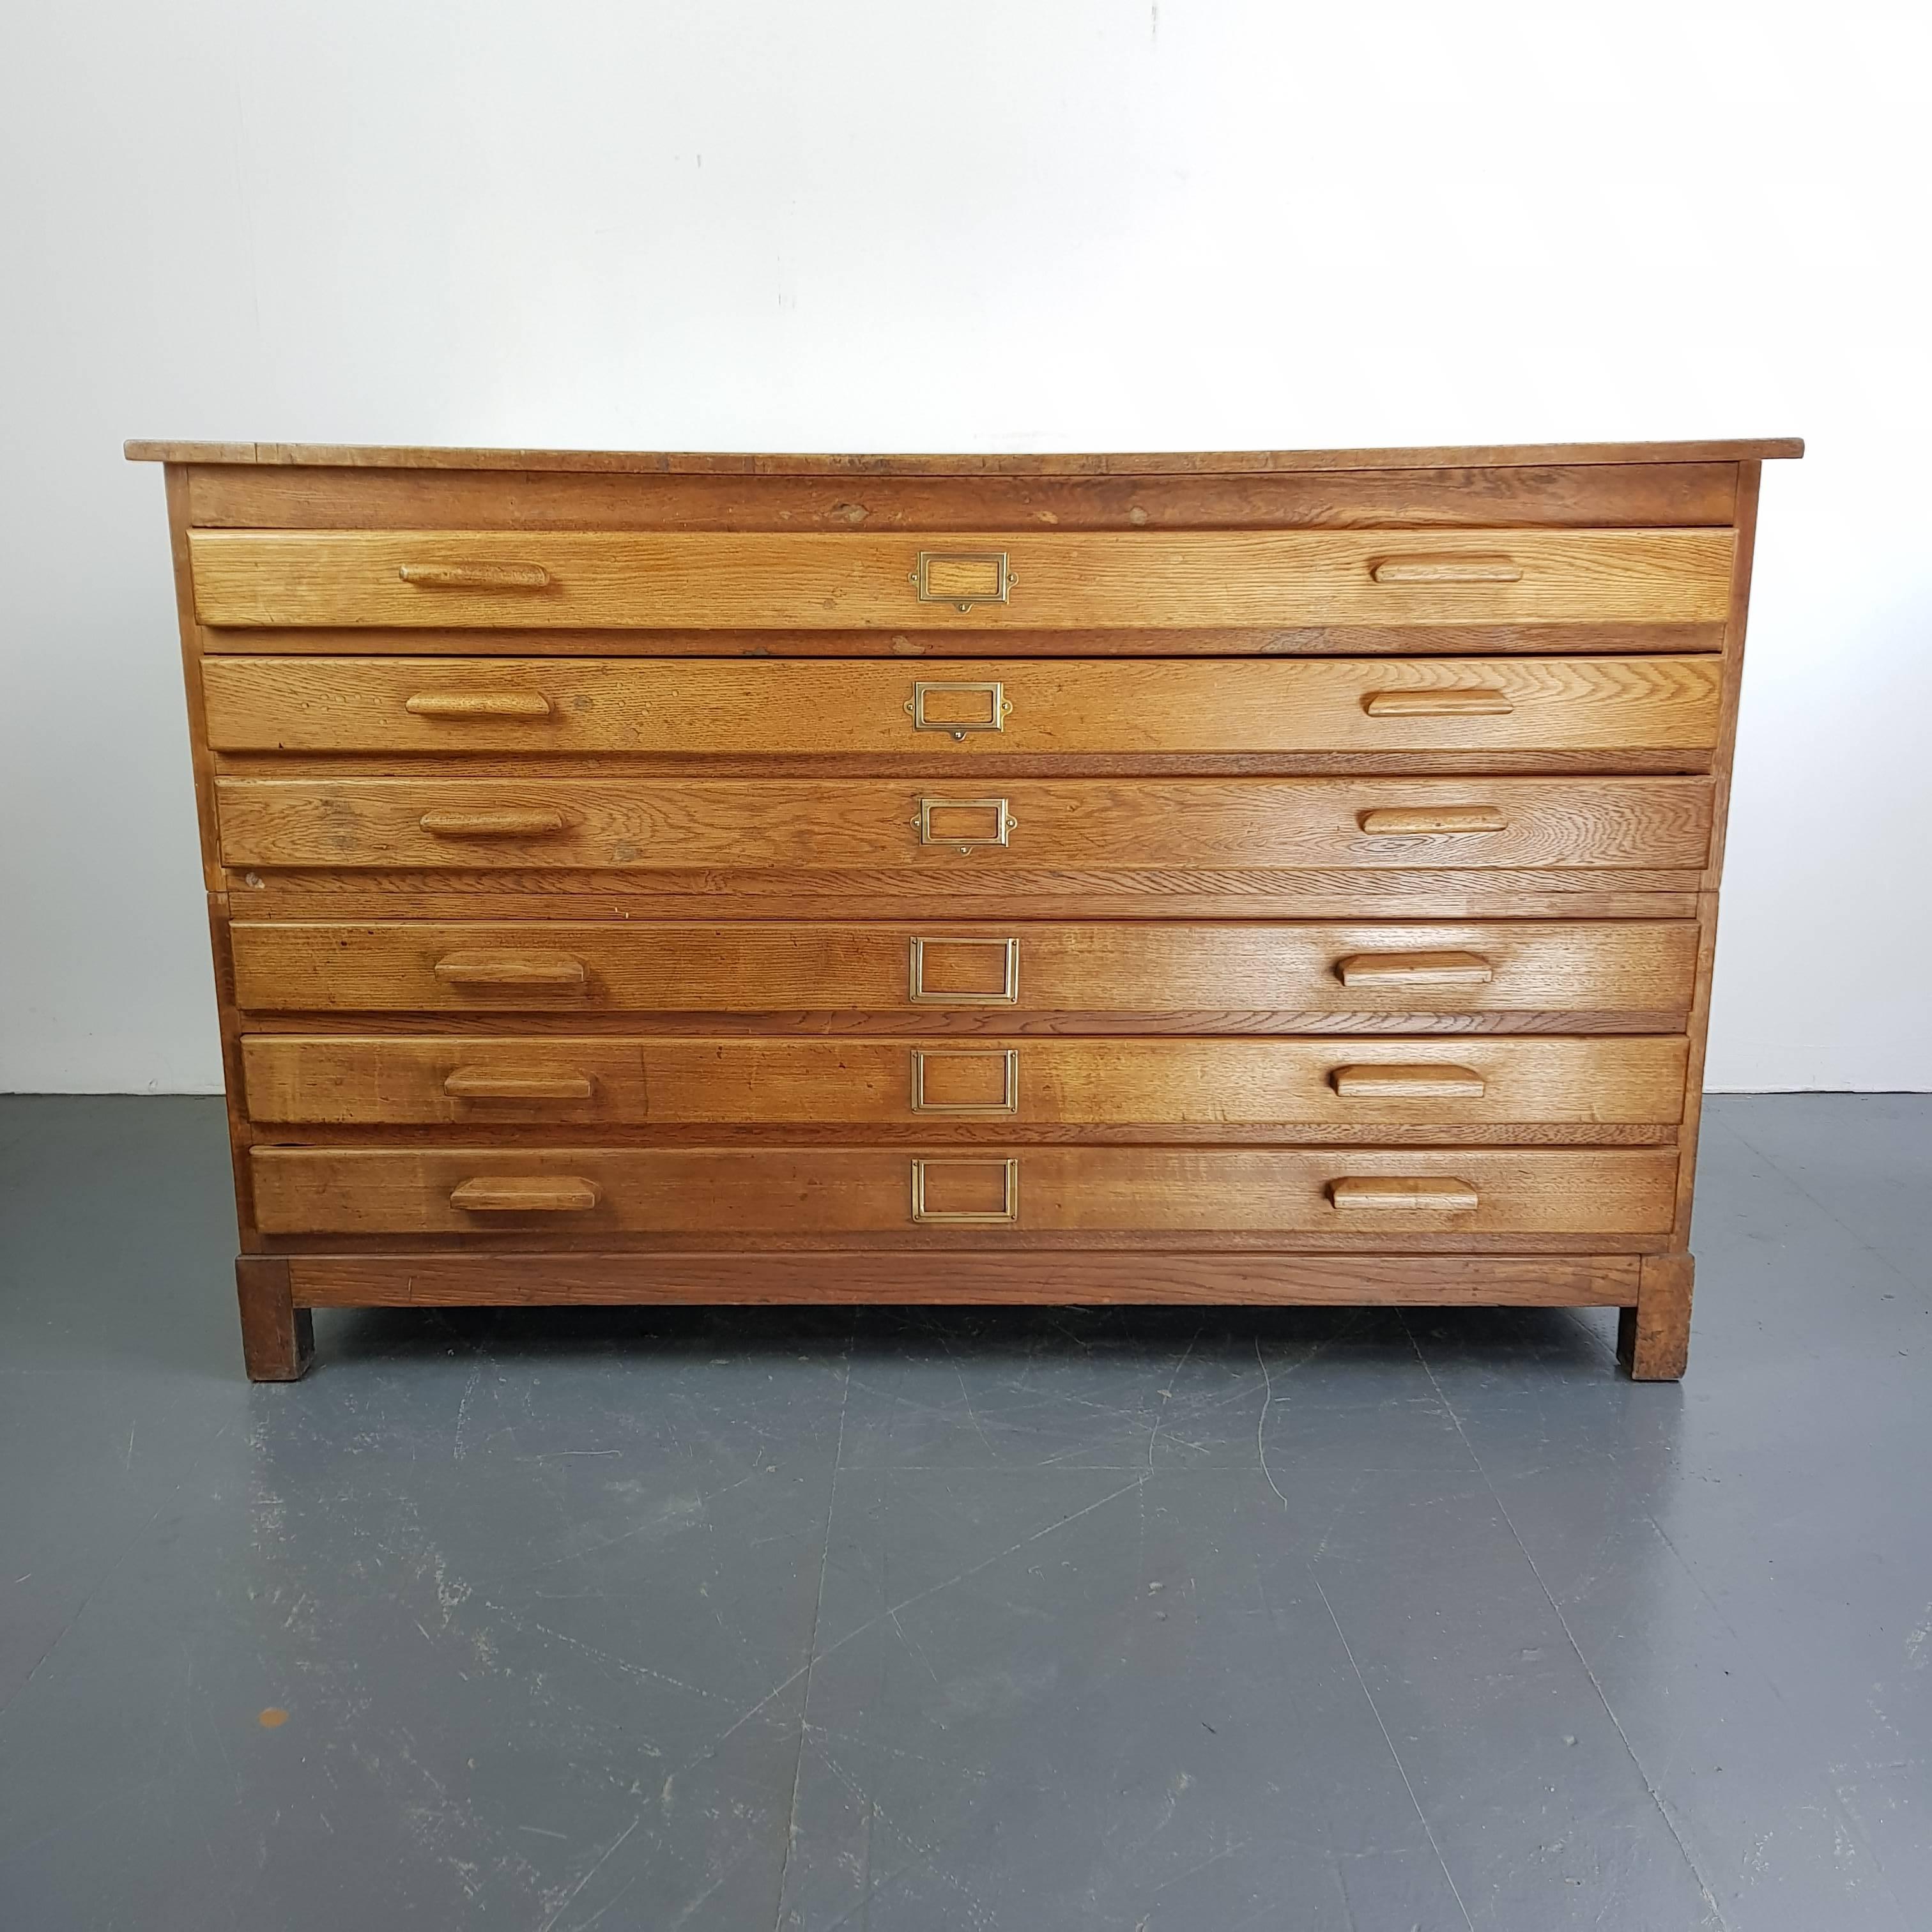 Lovely oak six drawer midcentury plan chest with wooden handles and brass label inserts and panelled sides.

The plan chest has six solid wooden drawers and panelled sides.

Approximate dimensions: 

Height 93 cm

Width 151 cm

Depth 102